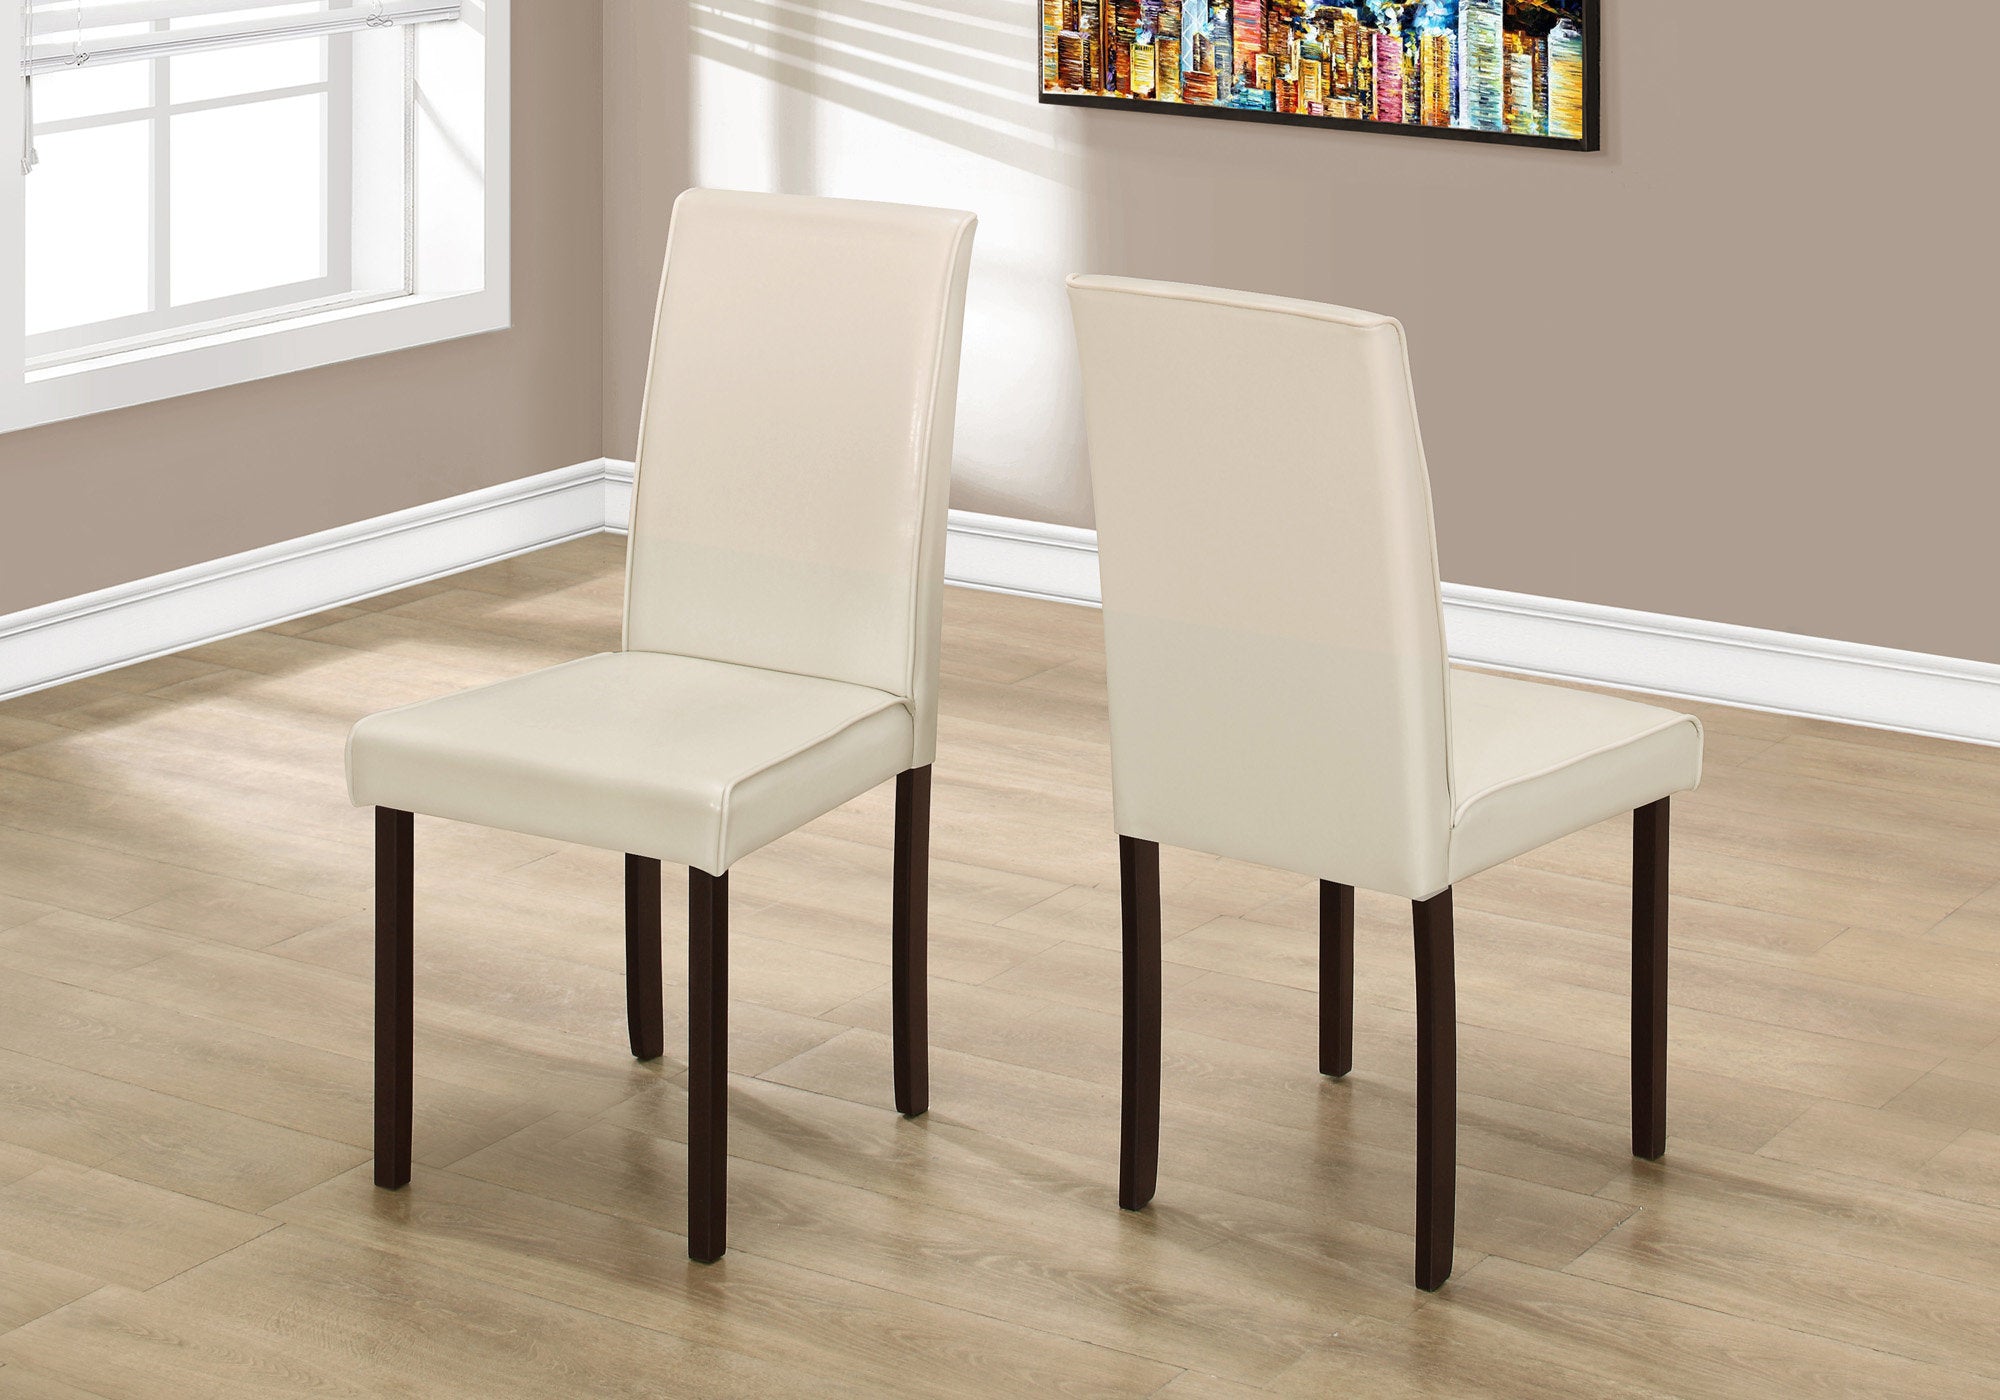 Afford High-Back Leather-Look Dining Chair (Set of 2 - Ivory)